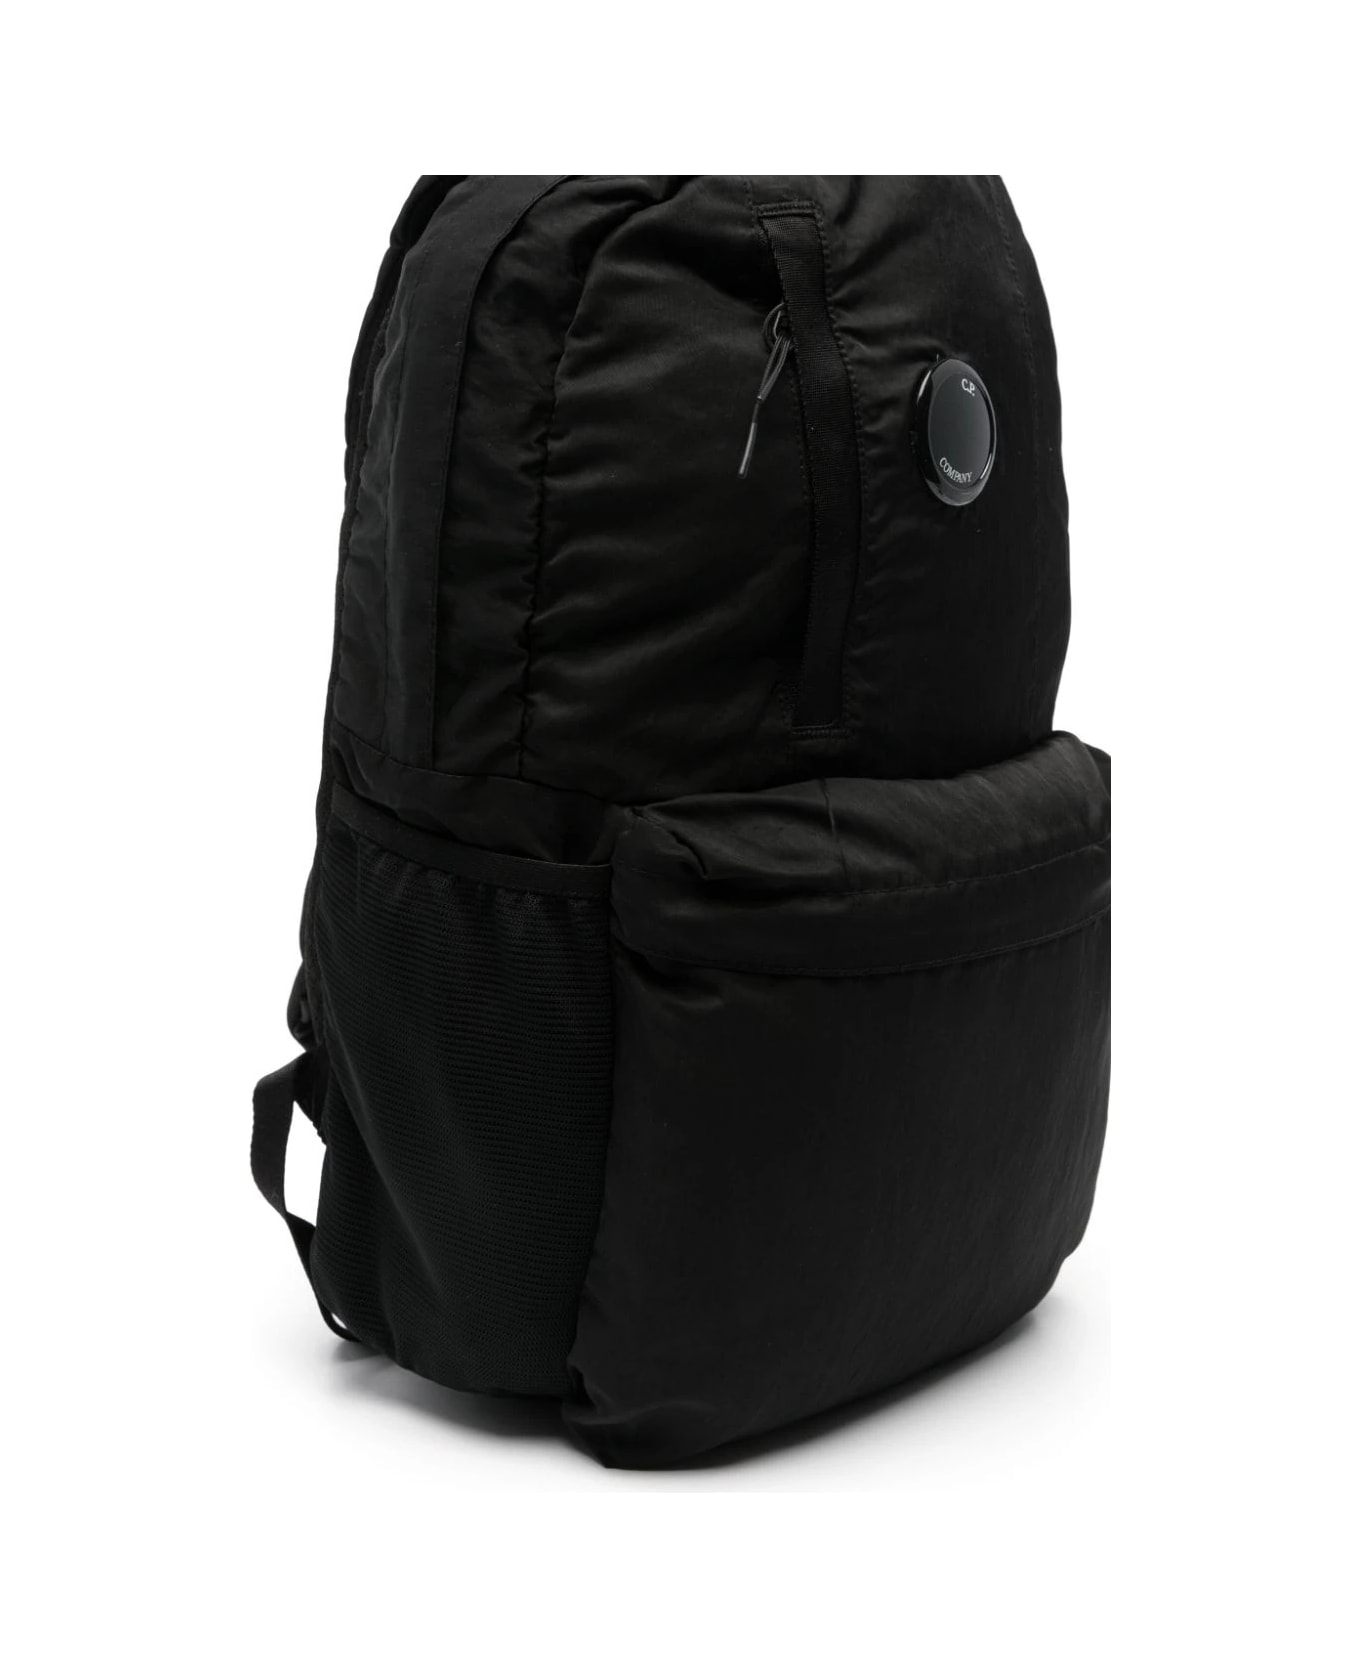 C.P. Company Undersixteen Laptop Backpack With Application - Black アクセサリー＆ギフト